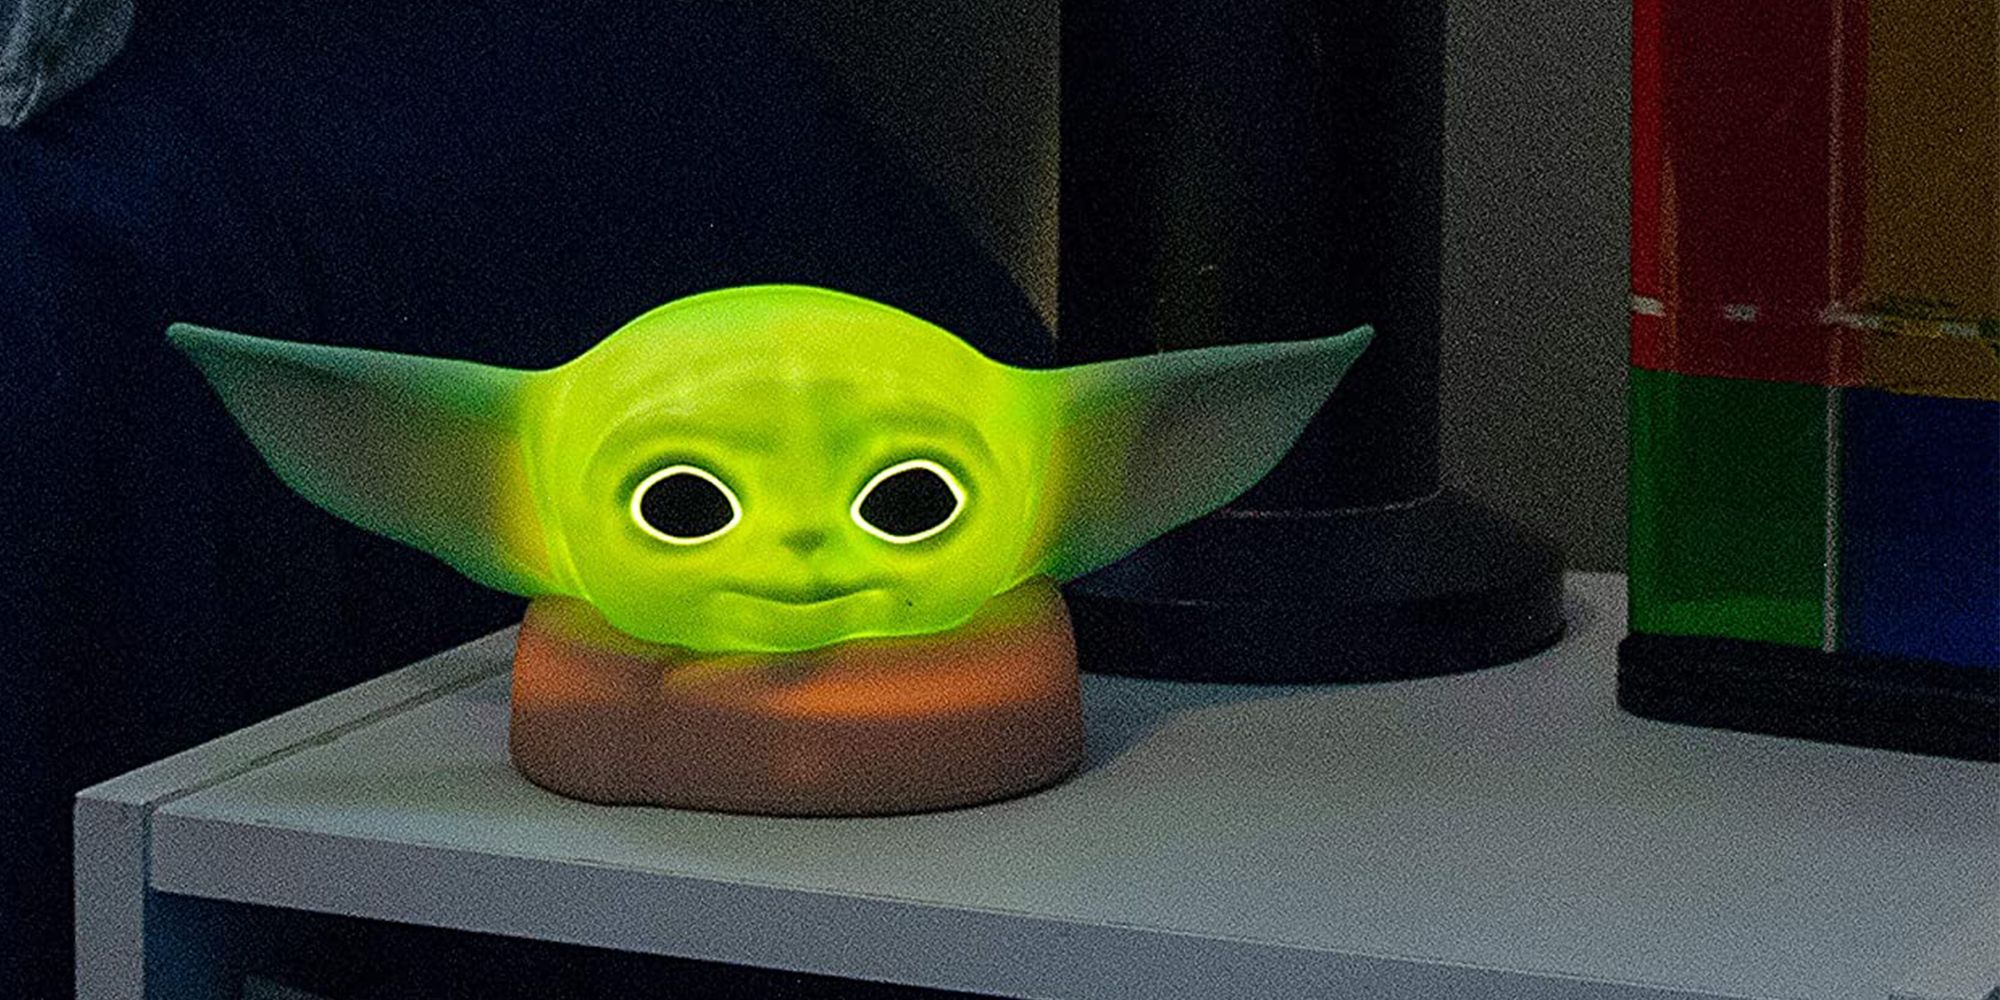 prompthunt: portrait photo of baby yoda wearing sunglasses, blue and yellow  neon lights, dark, highly detailed, 4 k